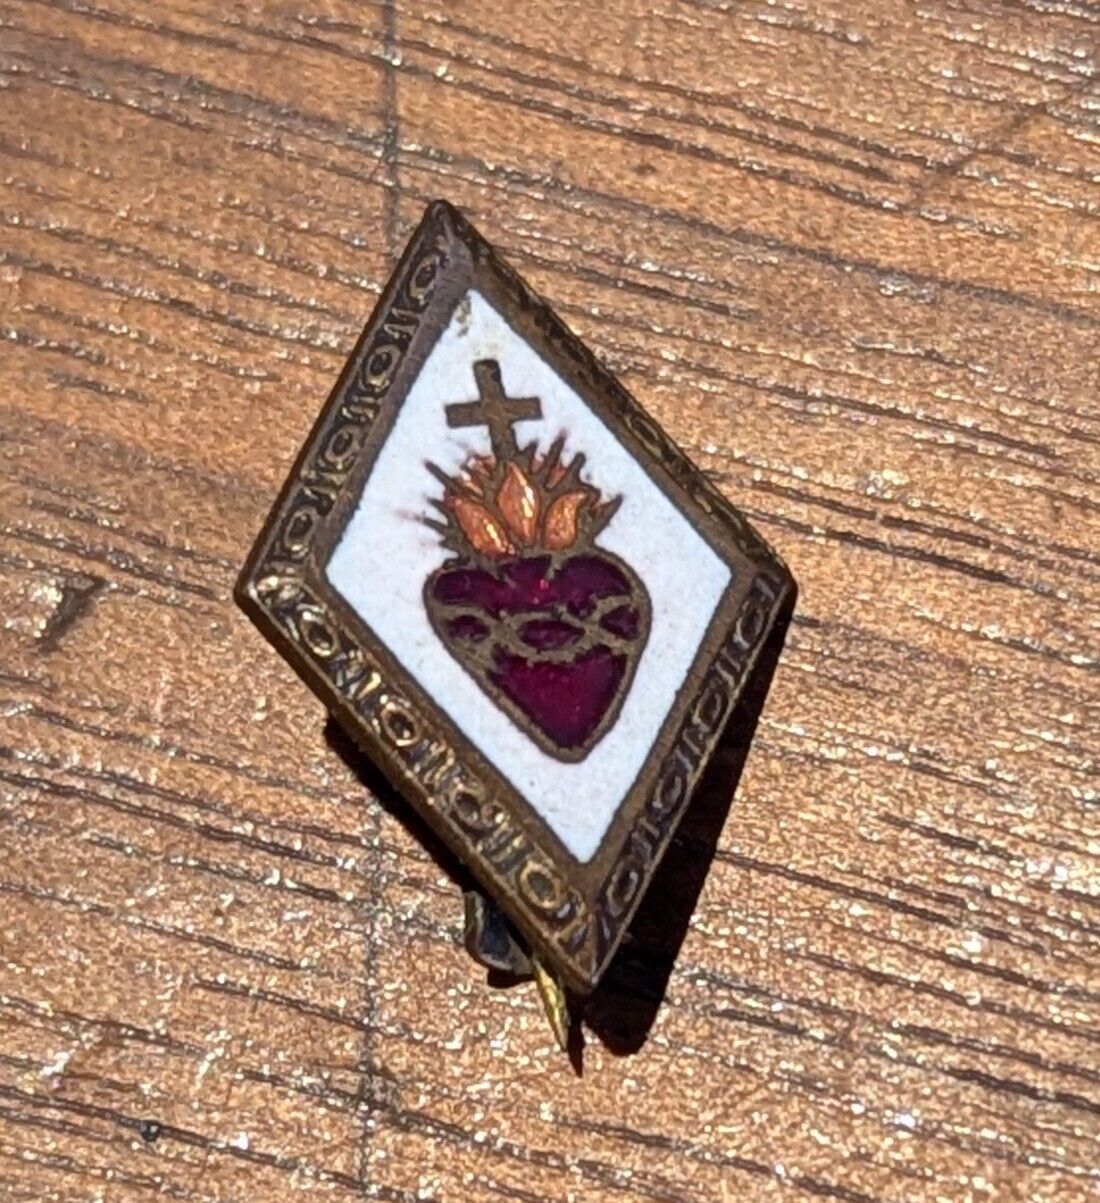 Small Vintage Sacred Heart of Jesus Lapel Pin with beautiful glass inlays.